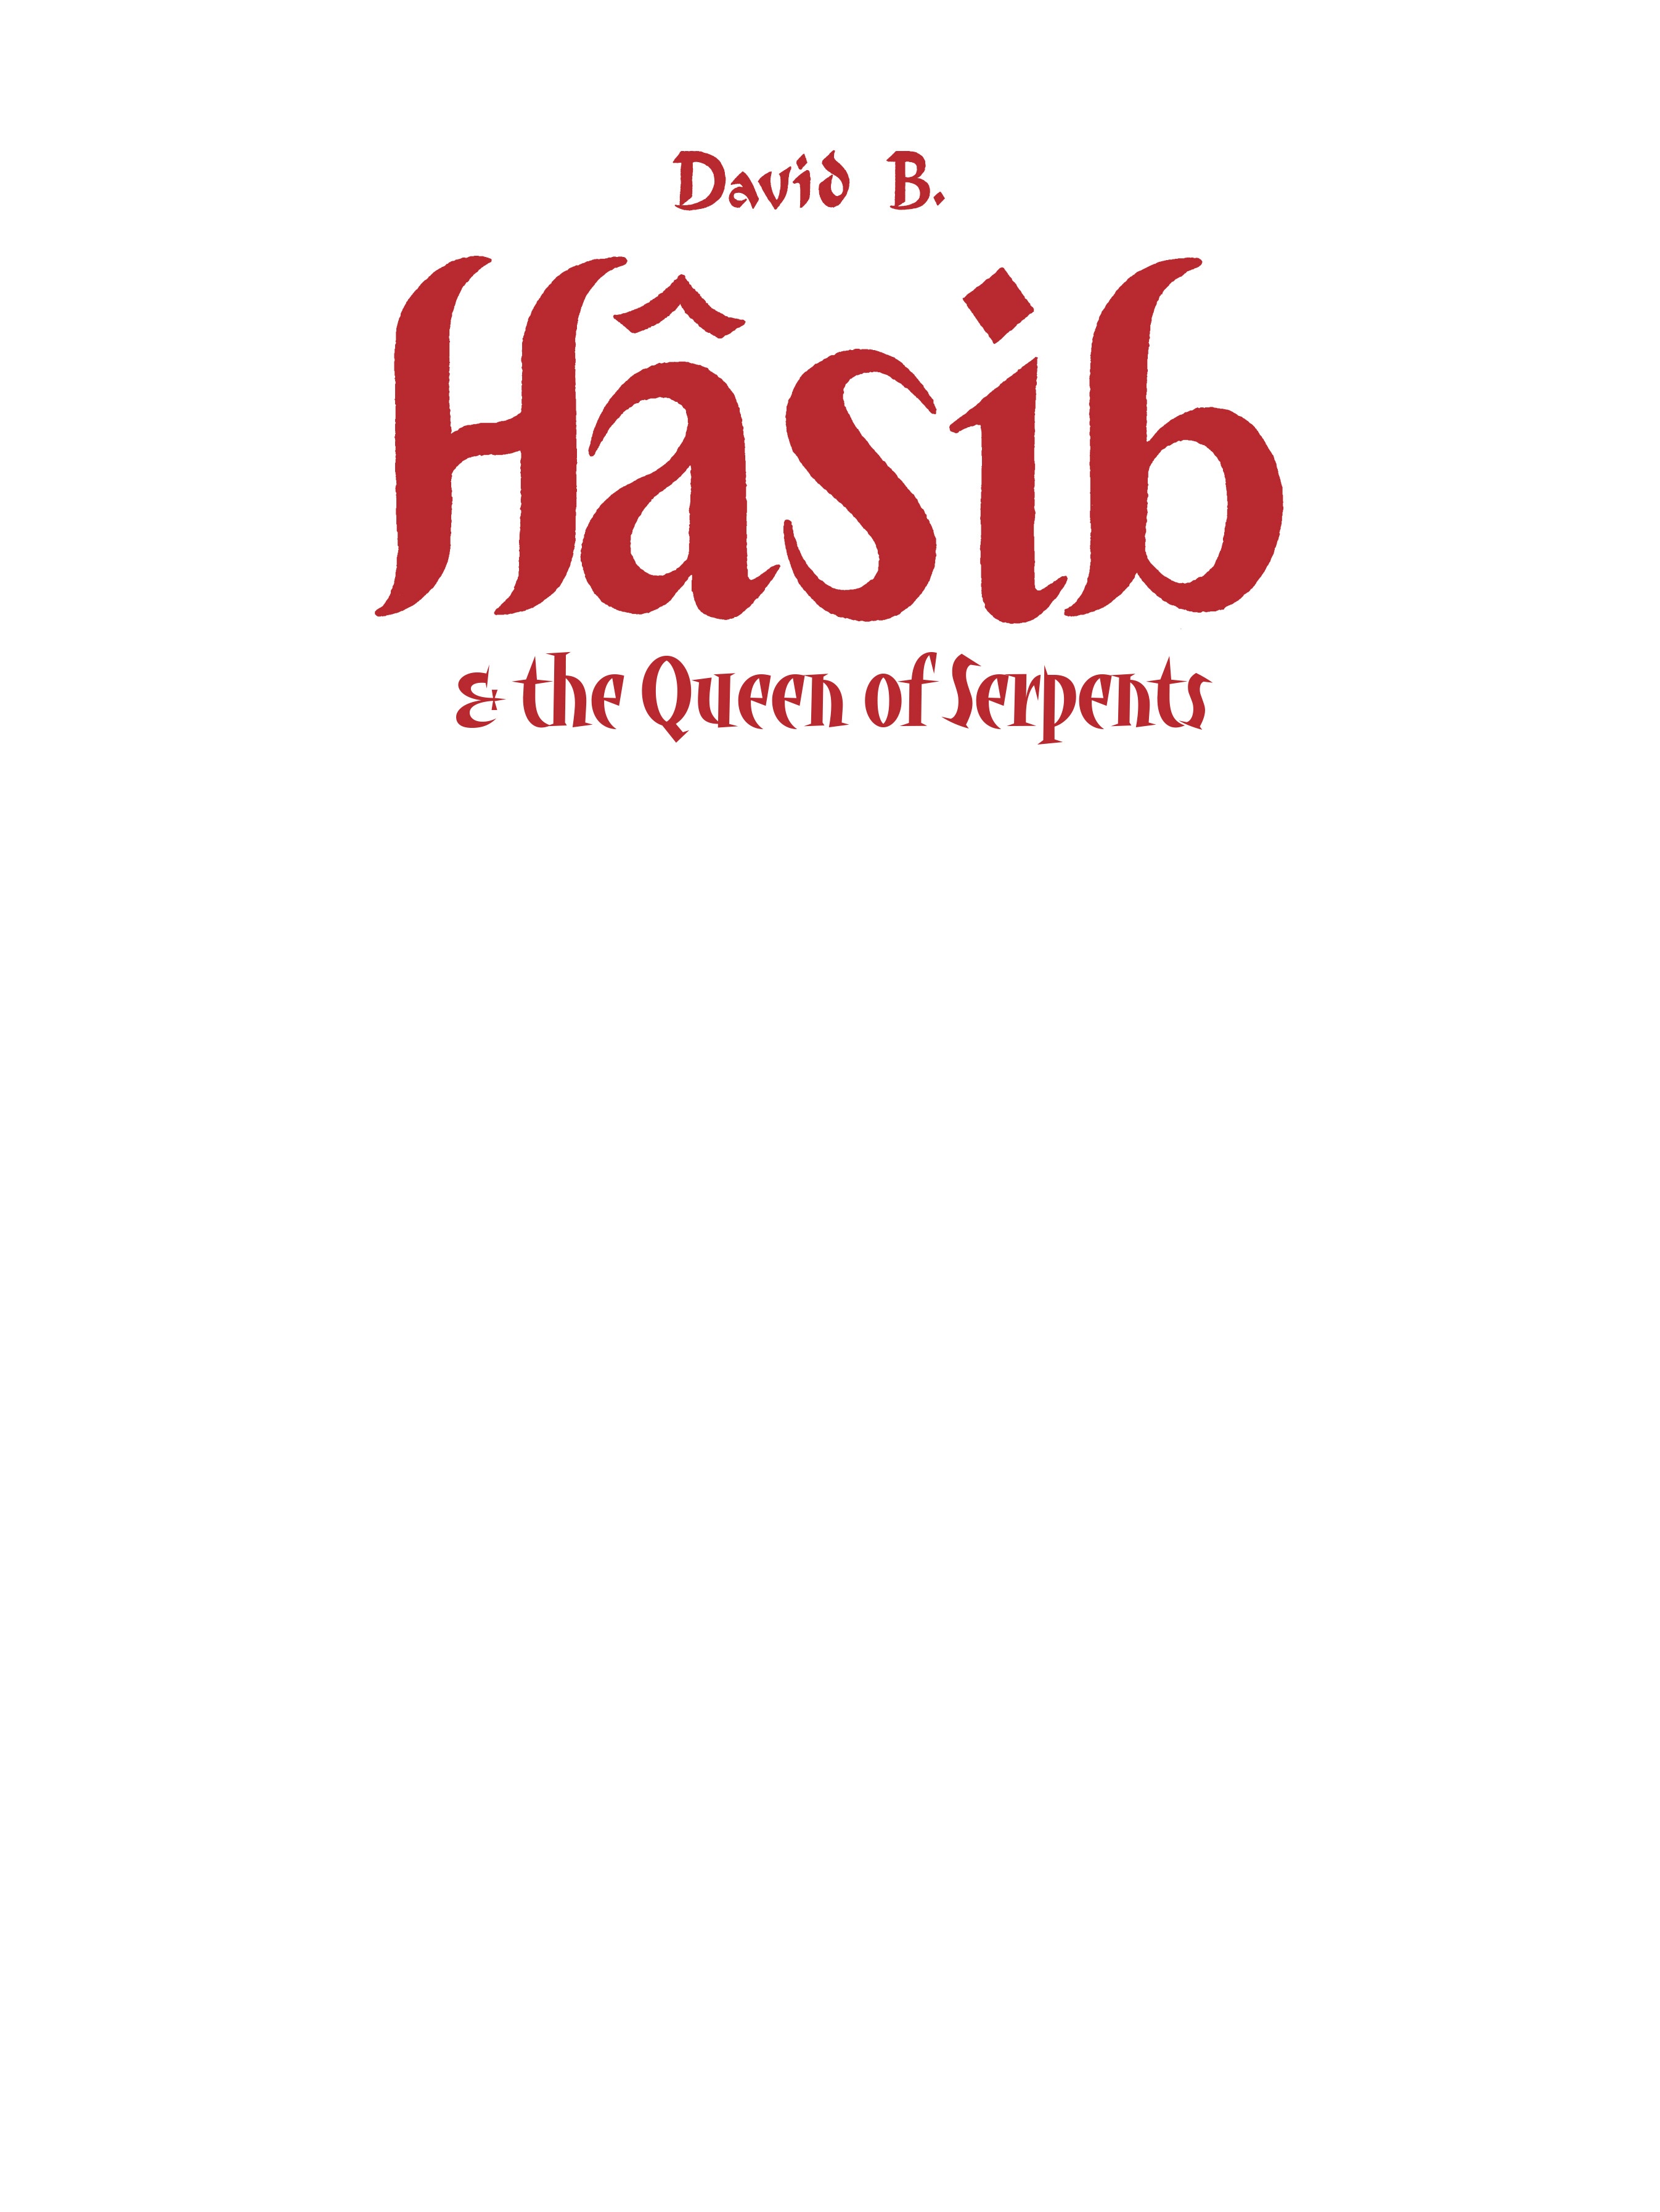 Read online A Tale of a Thousand and One Nights: HASIB & the Queen of Serpents comic -  Issue # TPB - 2